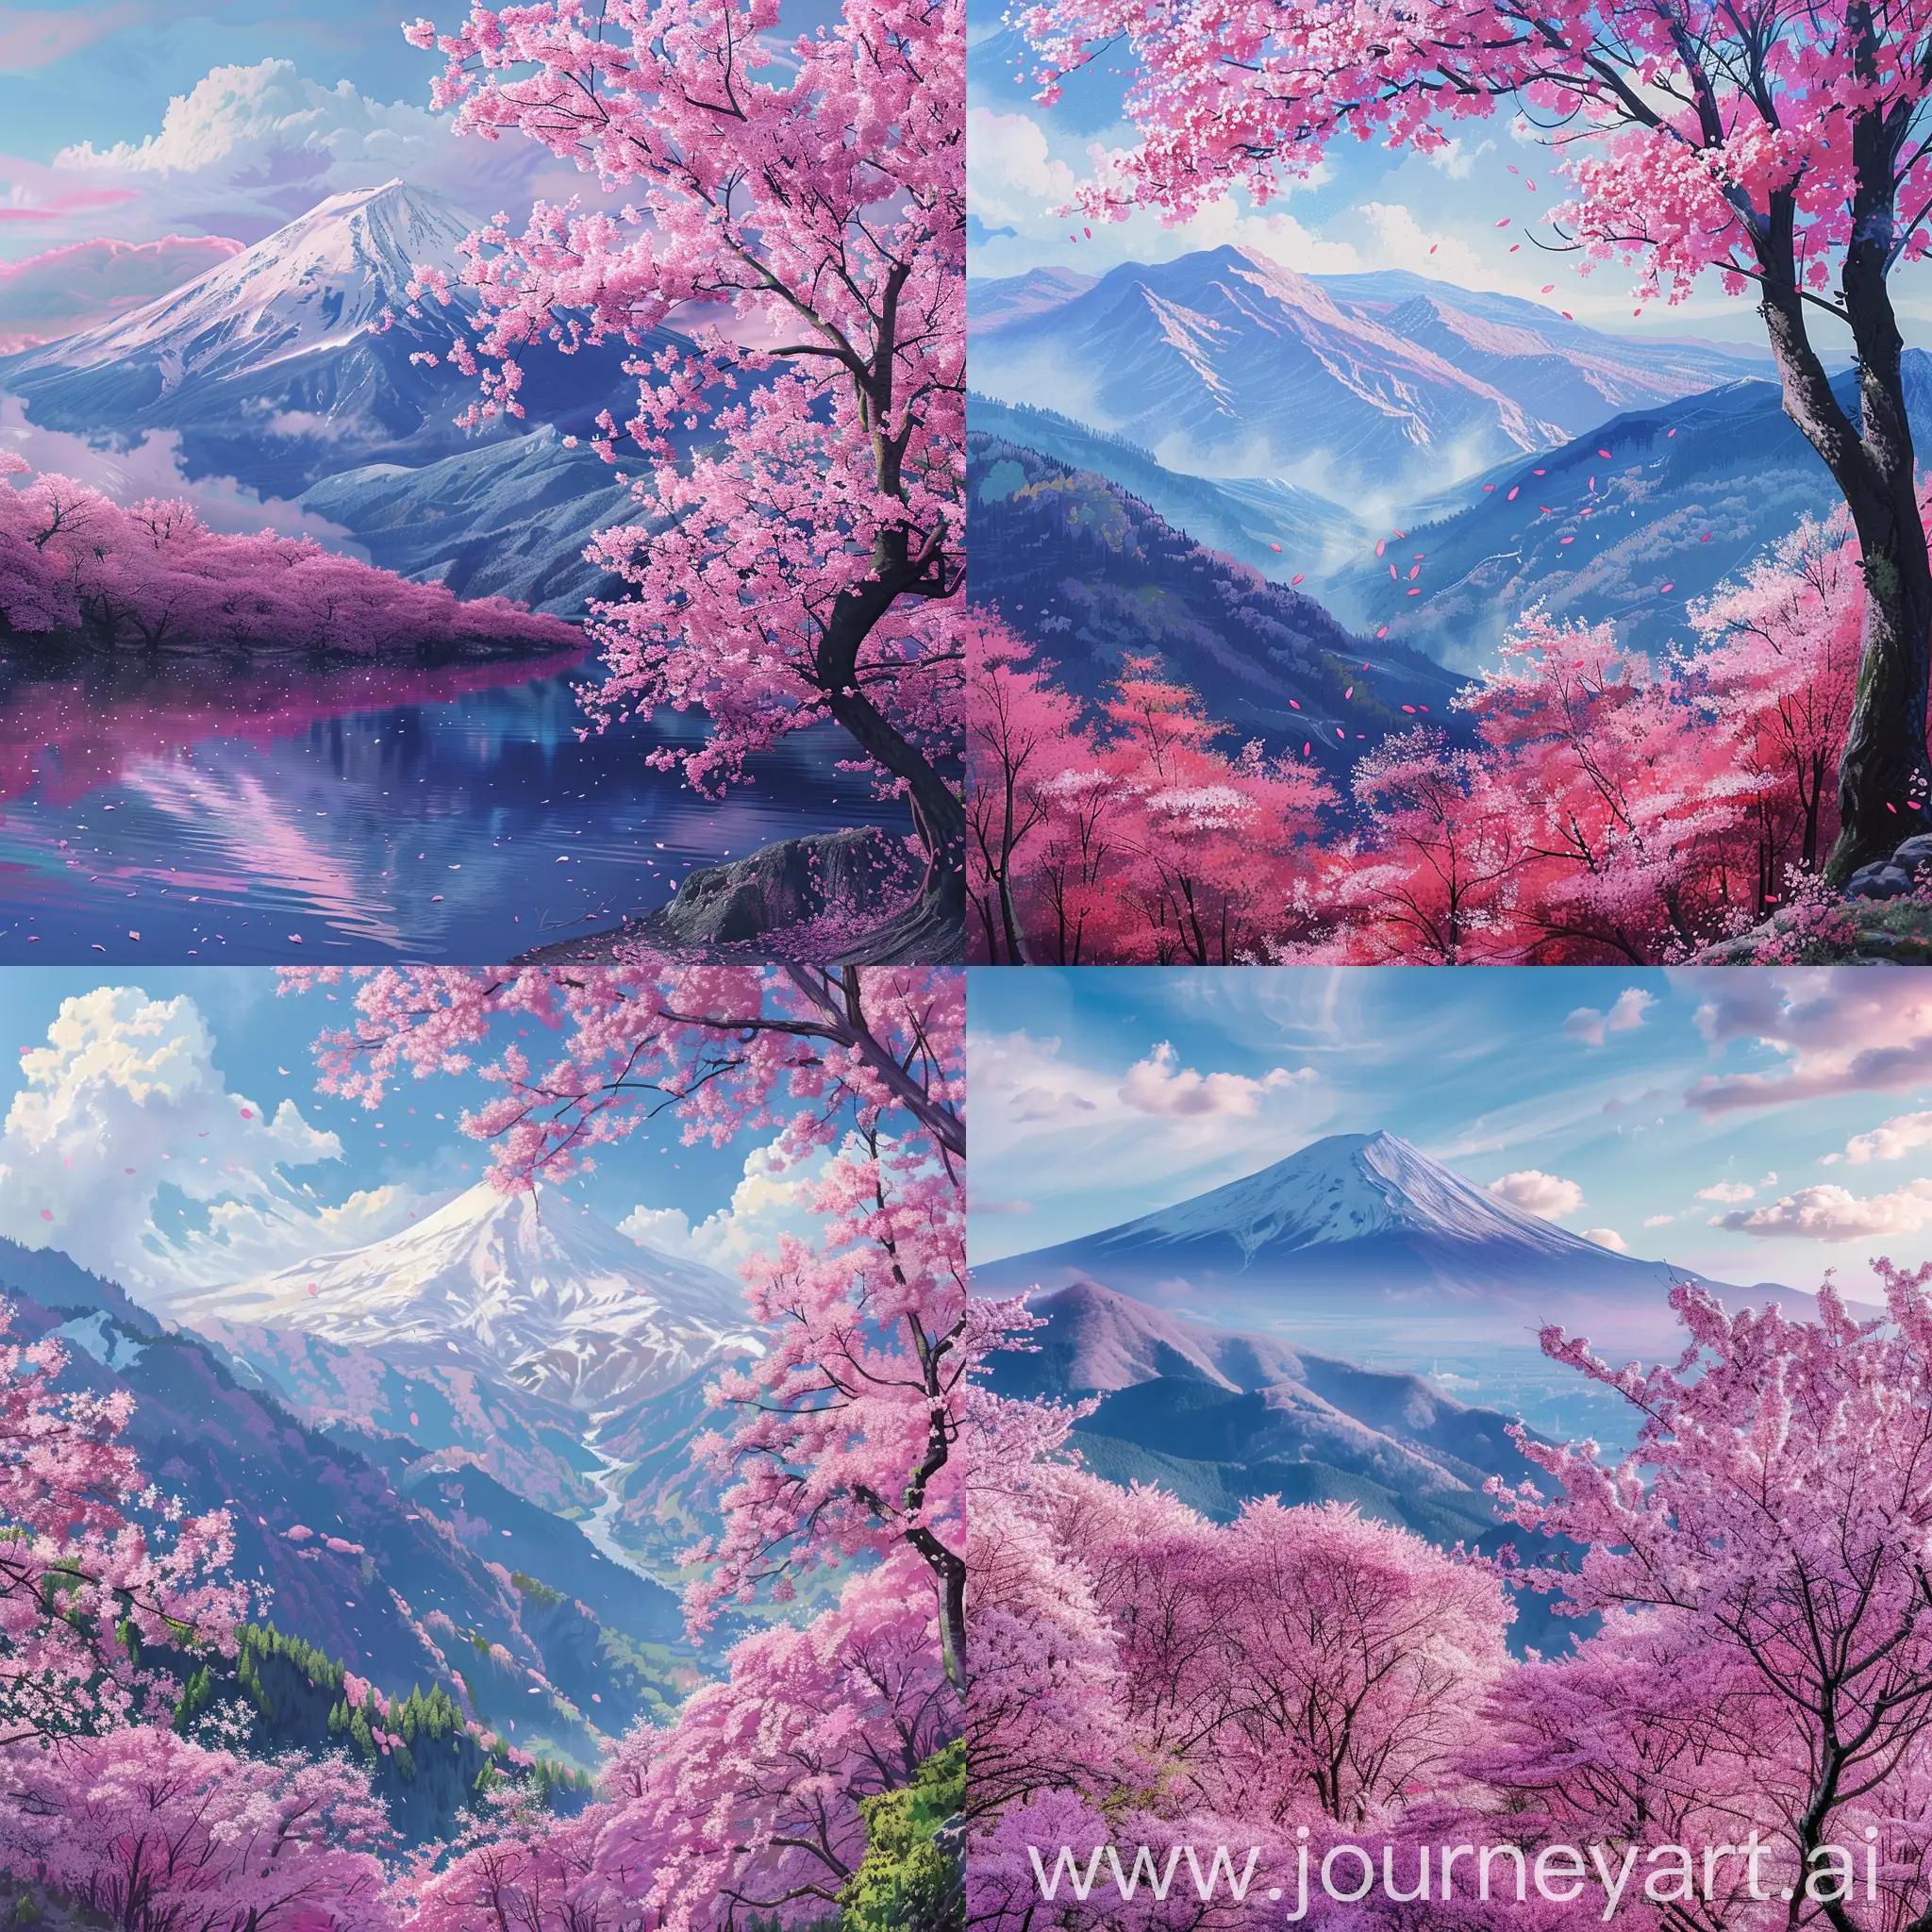 Scenic-Cherry-Blossoms-and-Mountain-Landscape-in-Japan